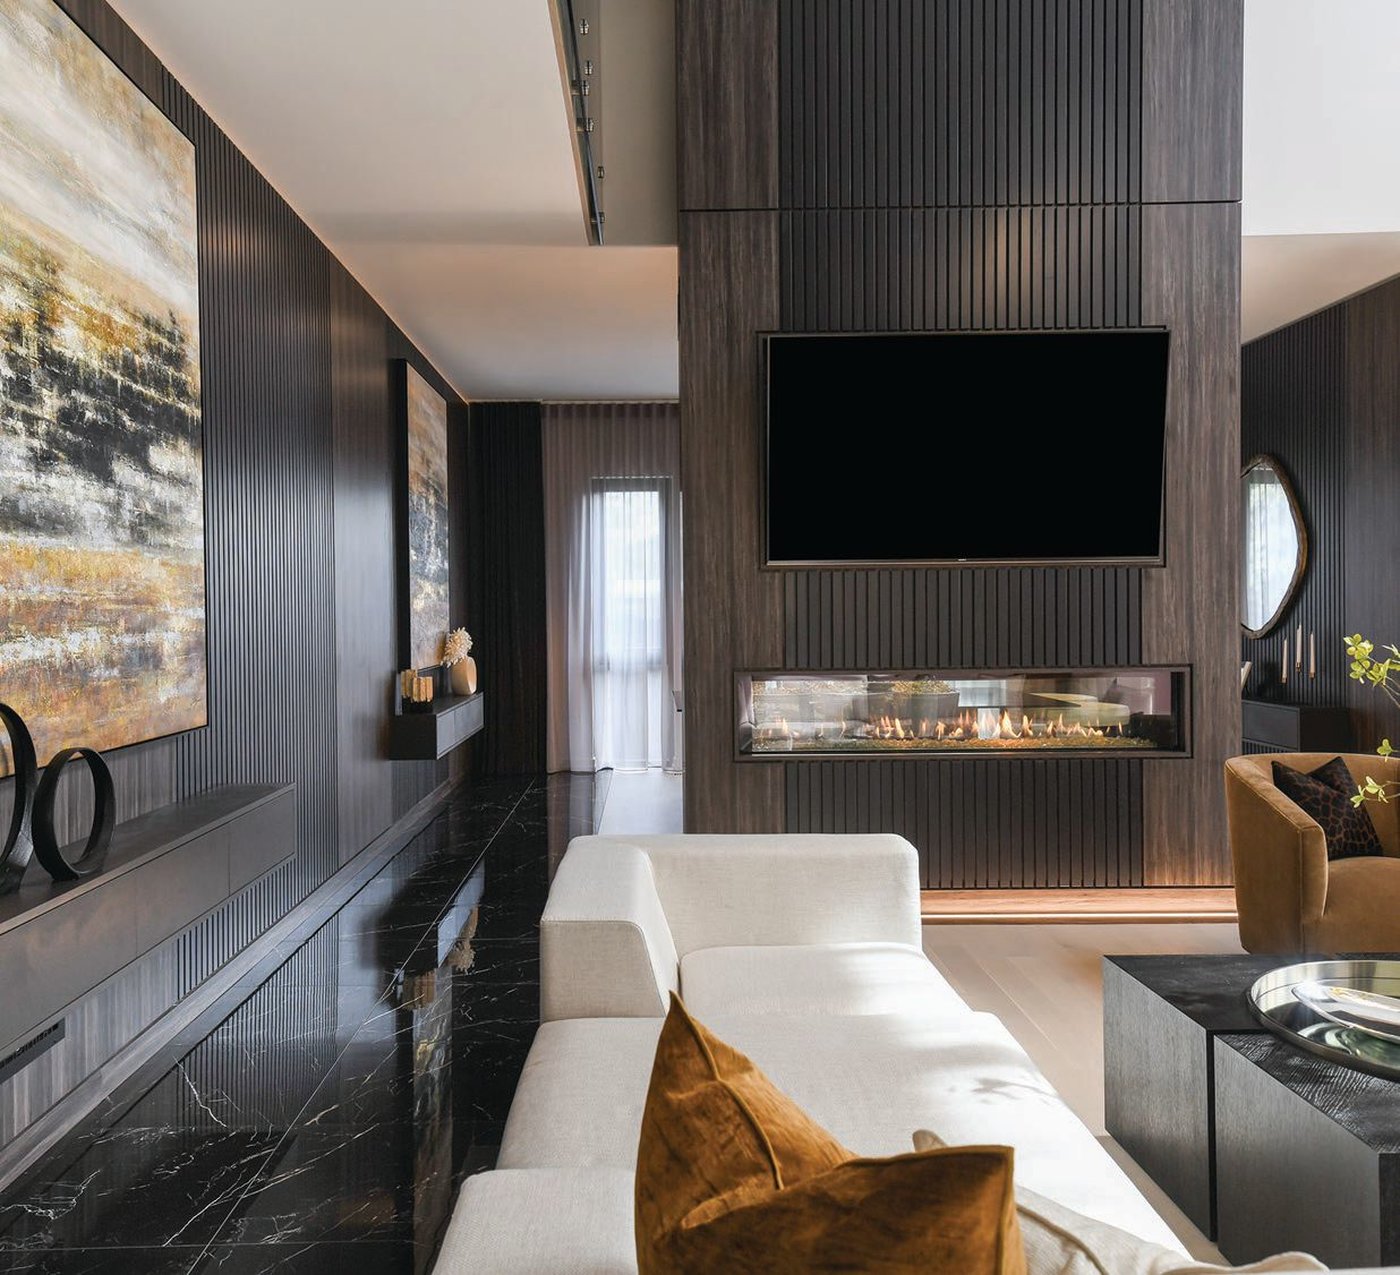 The great room, clad in smoky tones and metallic finishes, is complemented by a combination of four sleek chandeliers from ET2 Contemporary Lighting. PHOTO BY ANGELIKA FRIDAY/CHIC-INTERIOR.COM